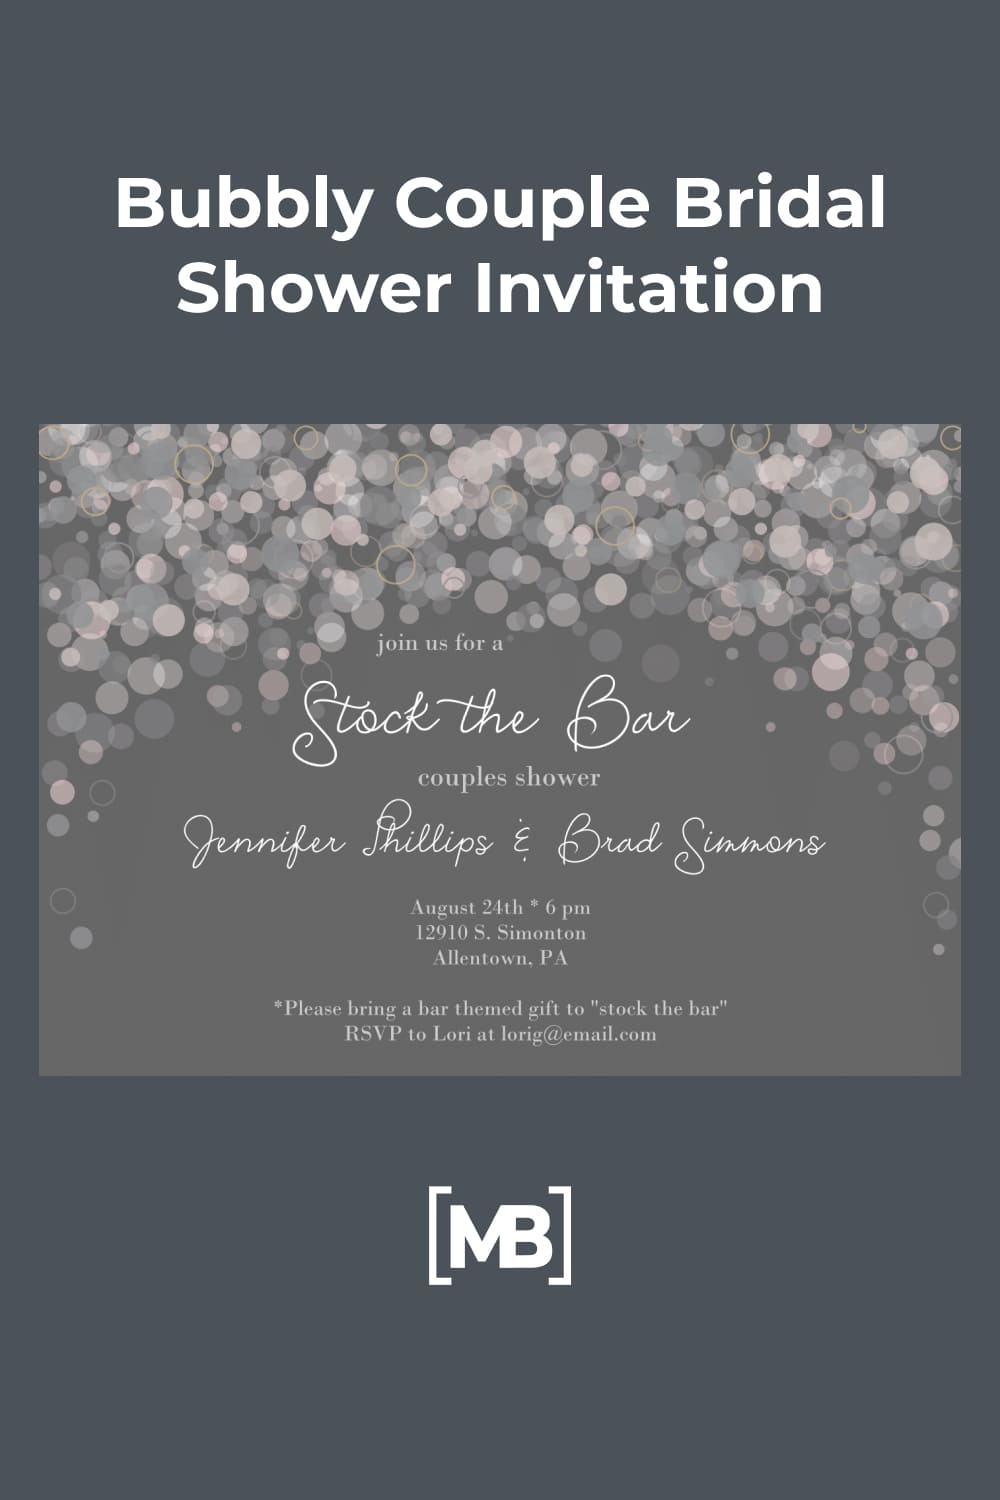 A very special holiday invitation decorated with various sparkles.